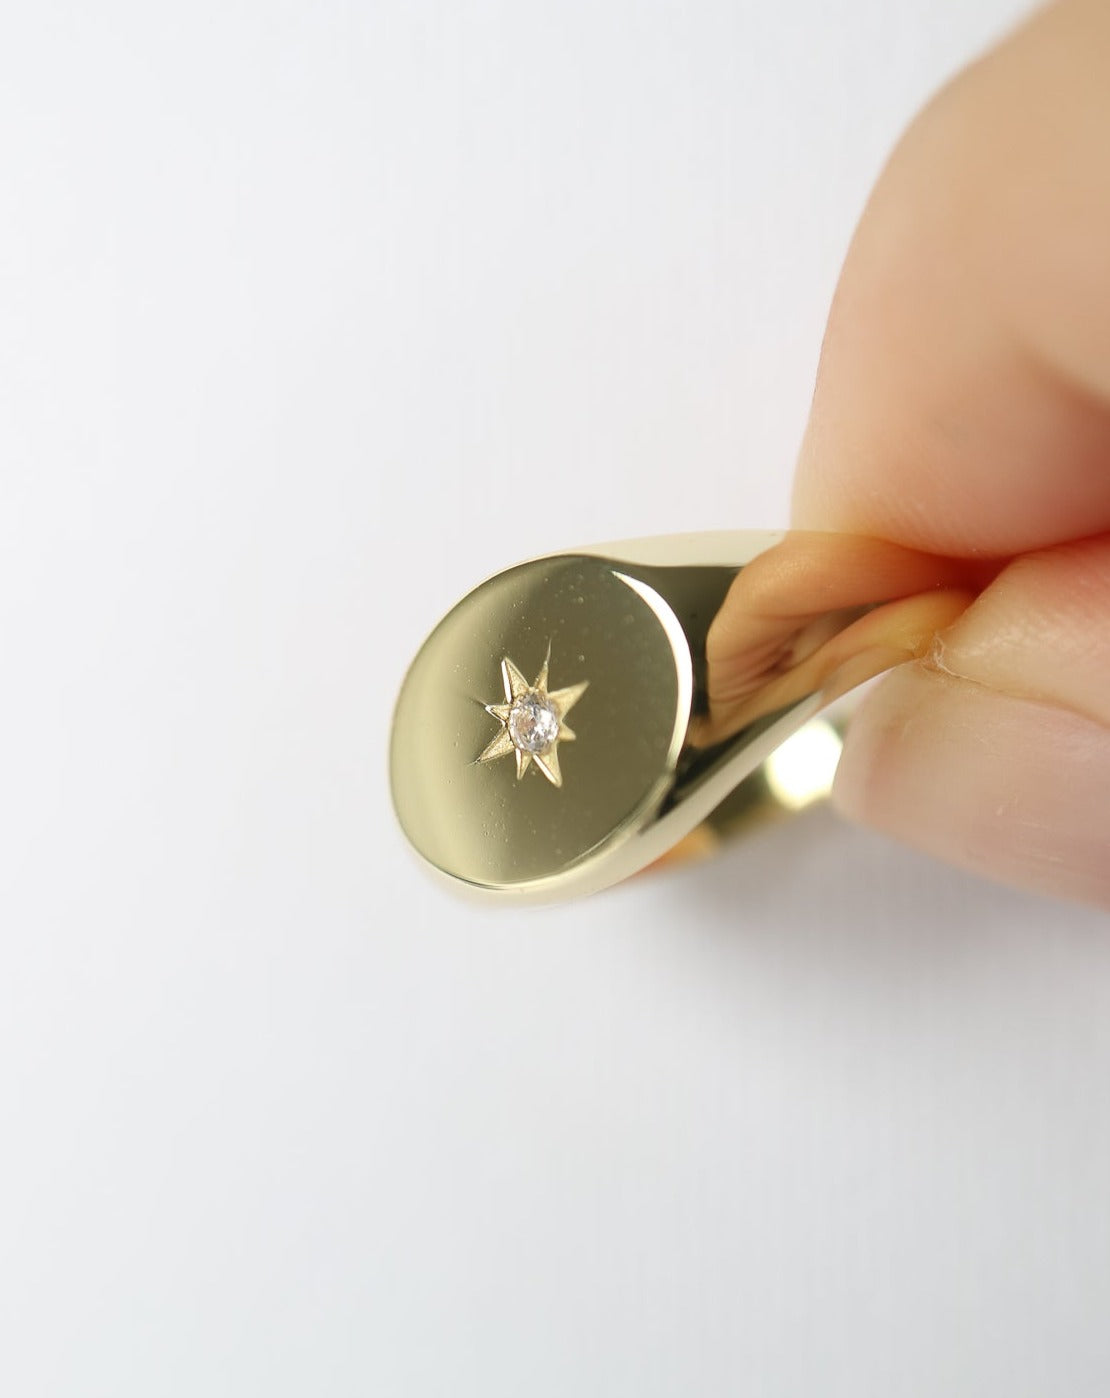 Star Signet Ring from Kini Jewels